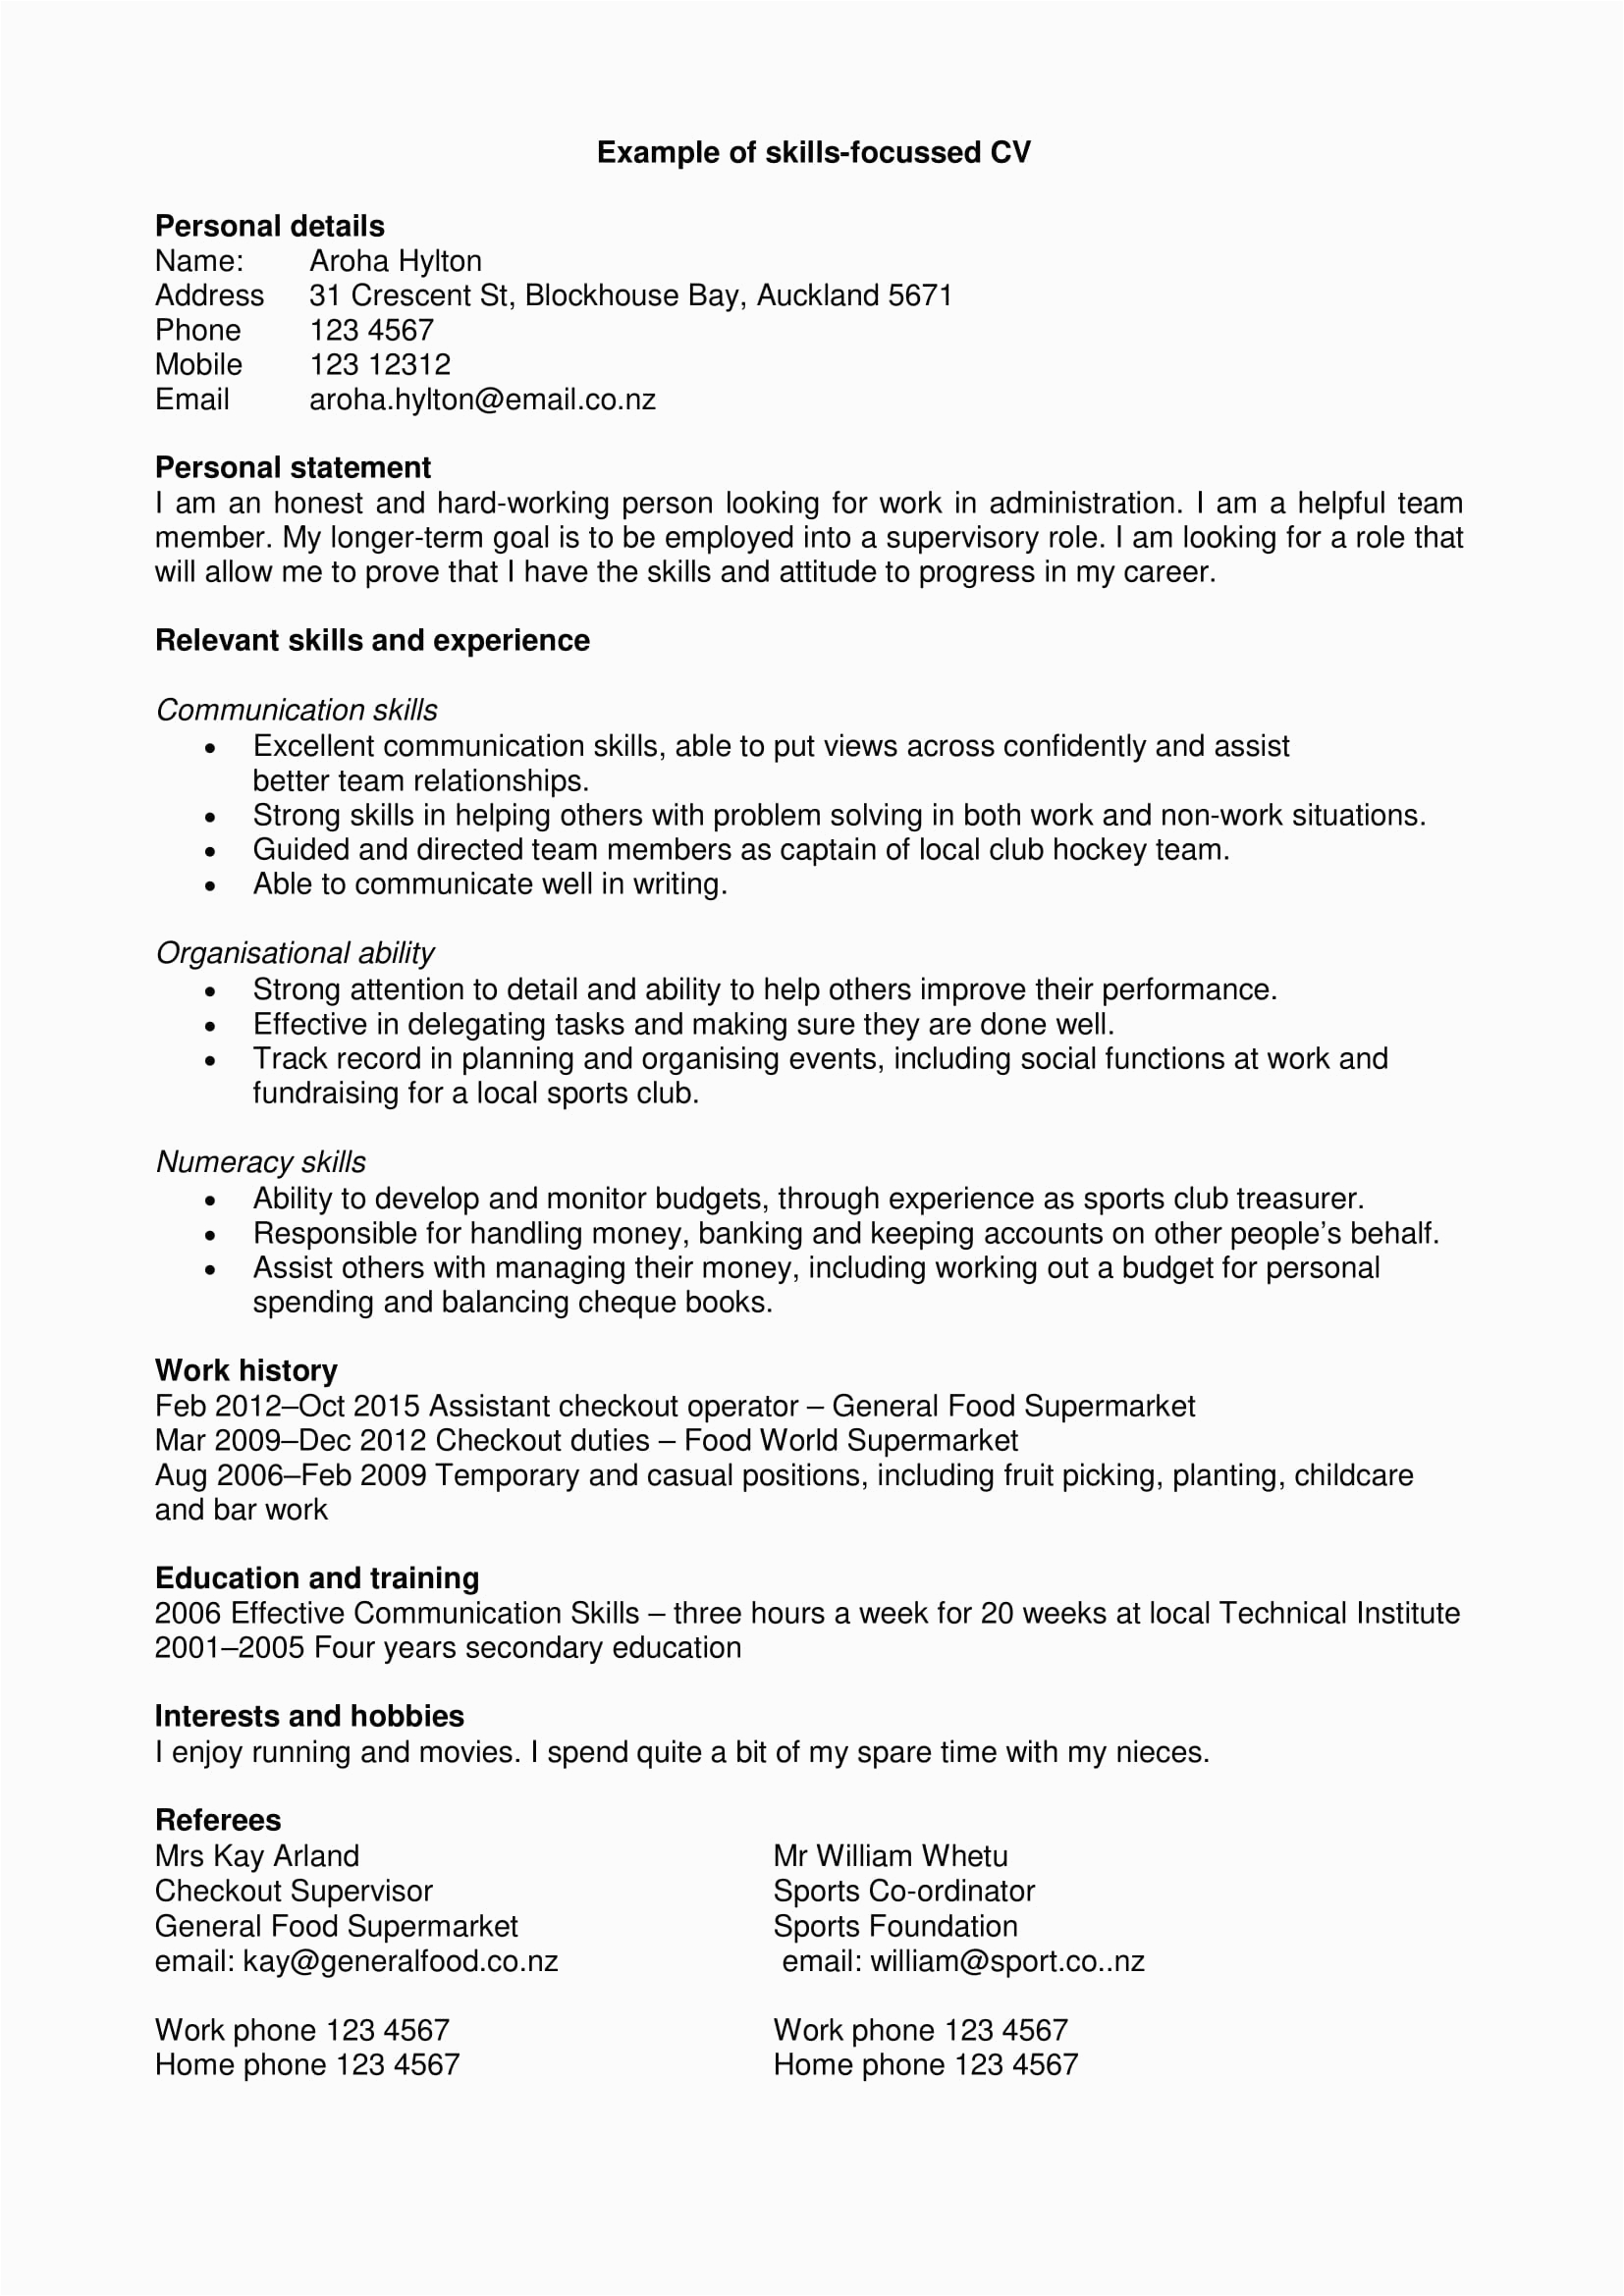 Sample Resume with A Personal Statement 16 Personal Summary Examples Pdf